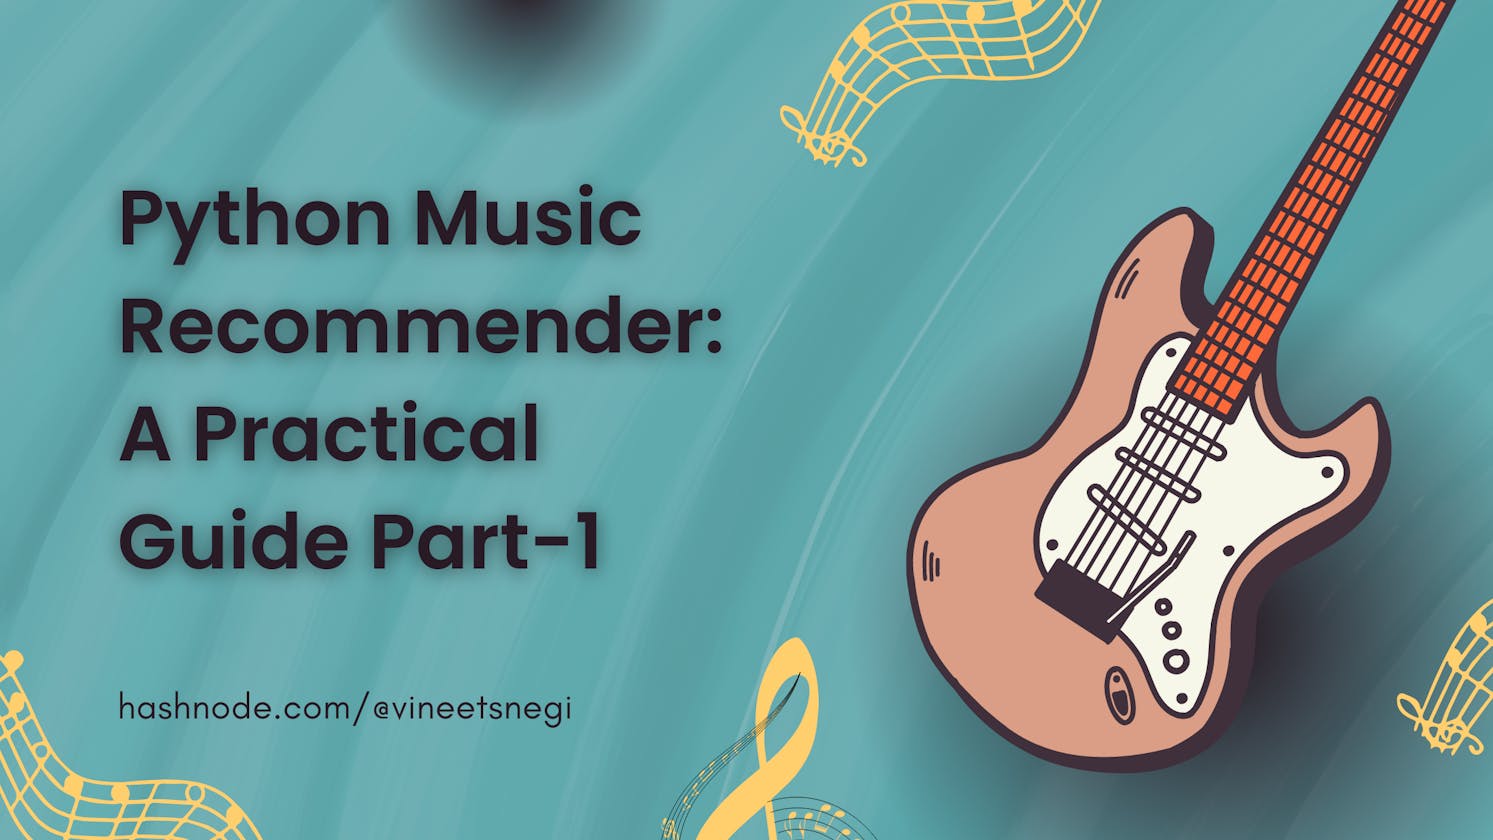 Python Music Recommender: A Practical Guide Part-1